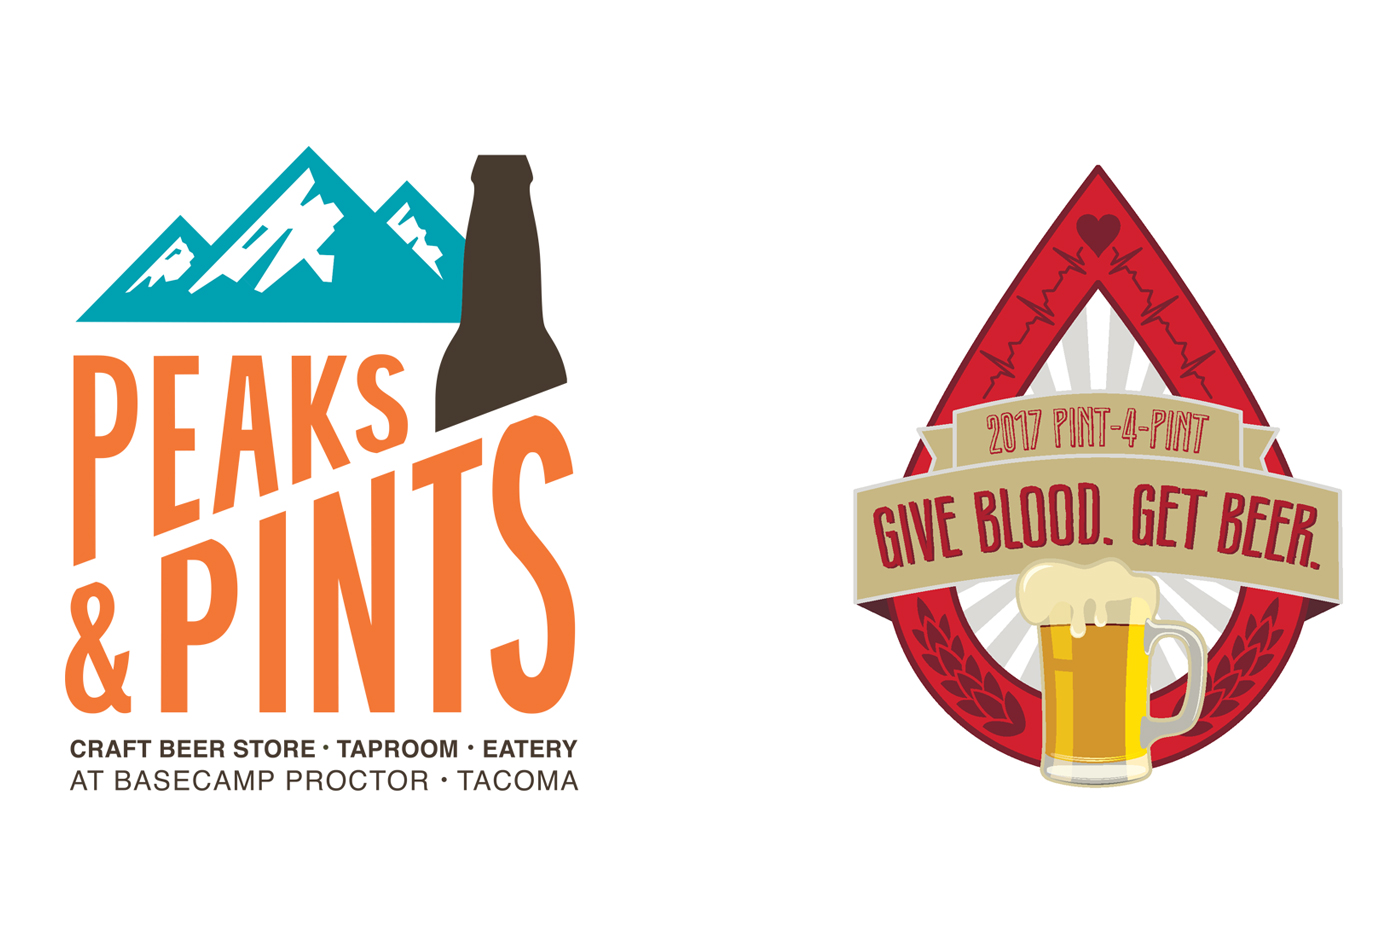 Give-Blood-Get-Beer-at-Peaks-and-Pints-calendar